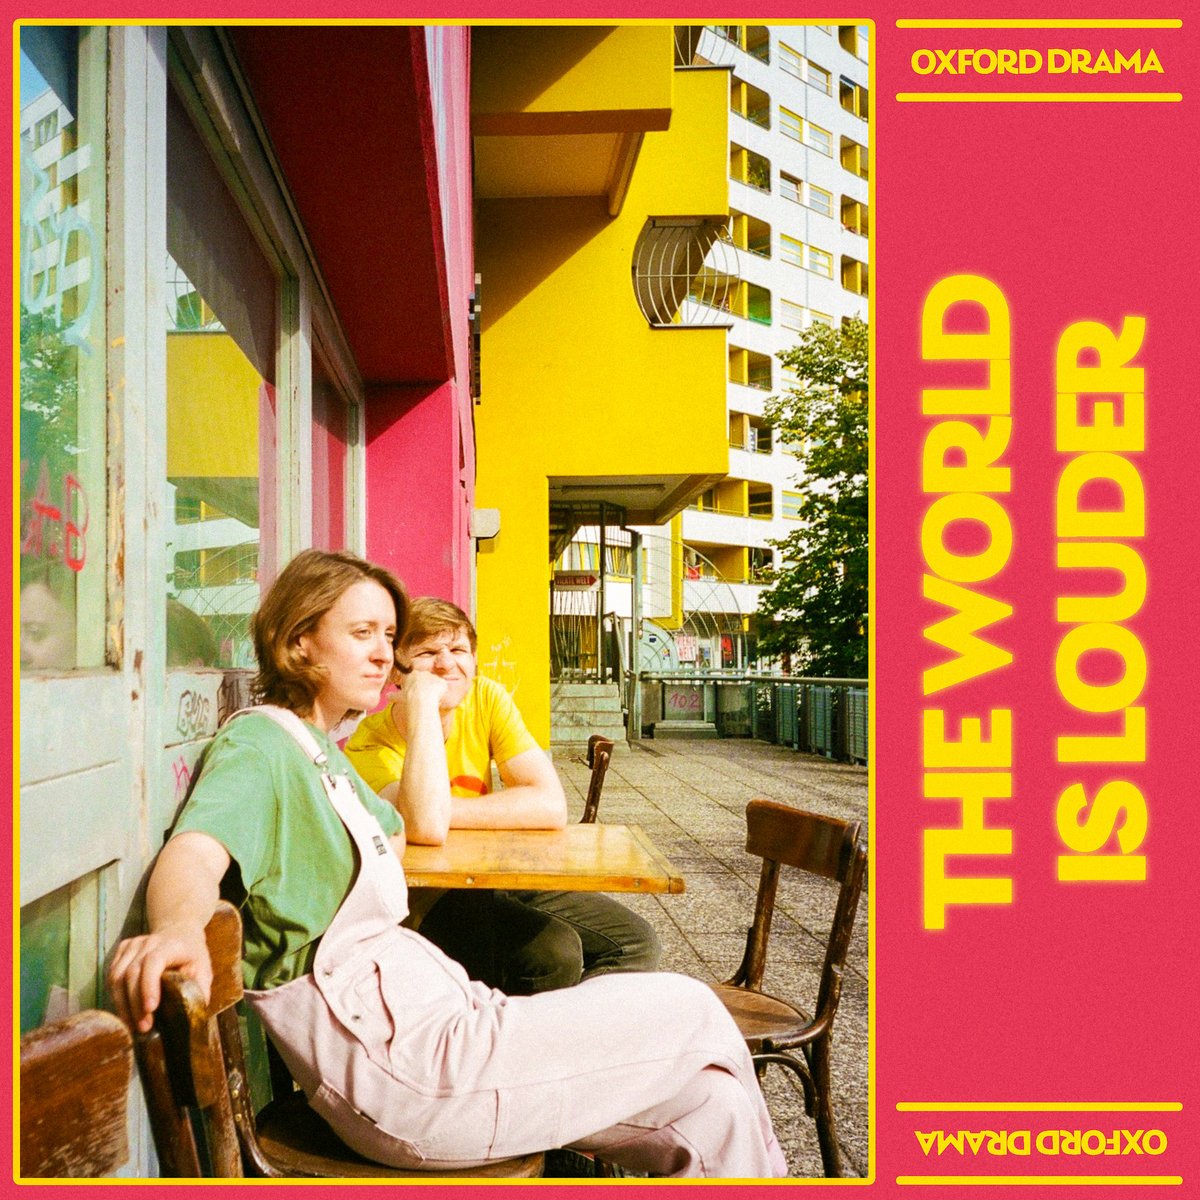 Highly recommended listening/ The World Is Louder by Oxford Drama oxforddrama.bandcamp.com/album/the-worl…